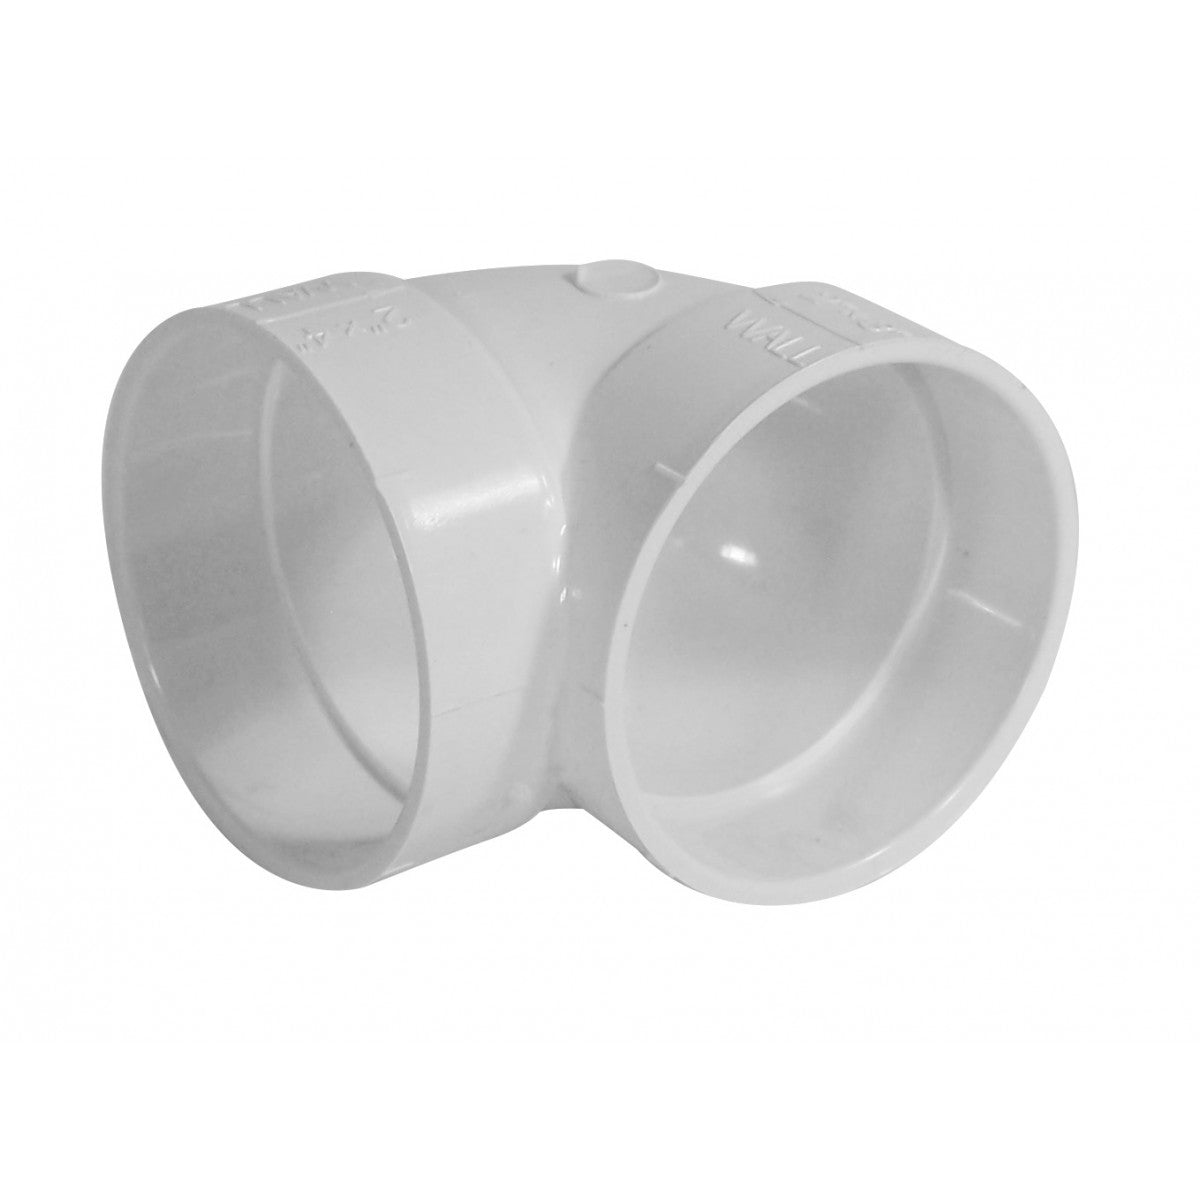 90 Degree Short Elbow for Central Vacuum Installation - White